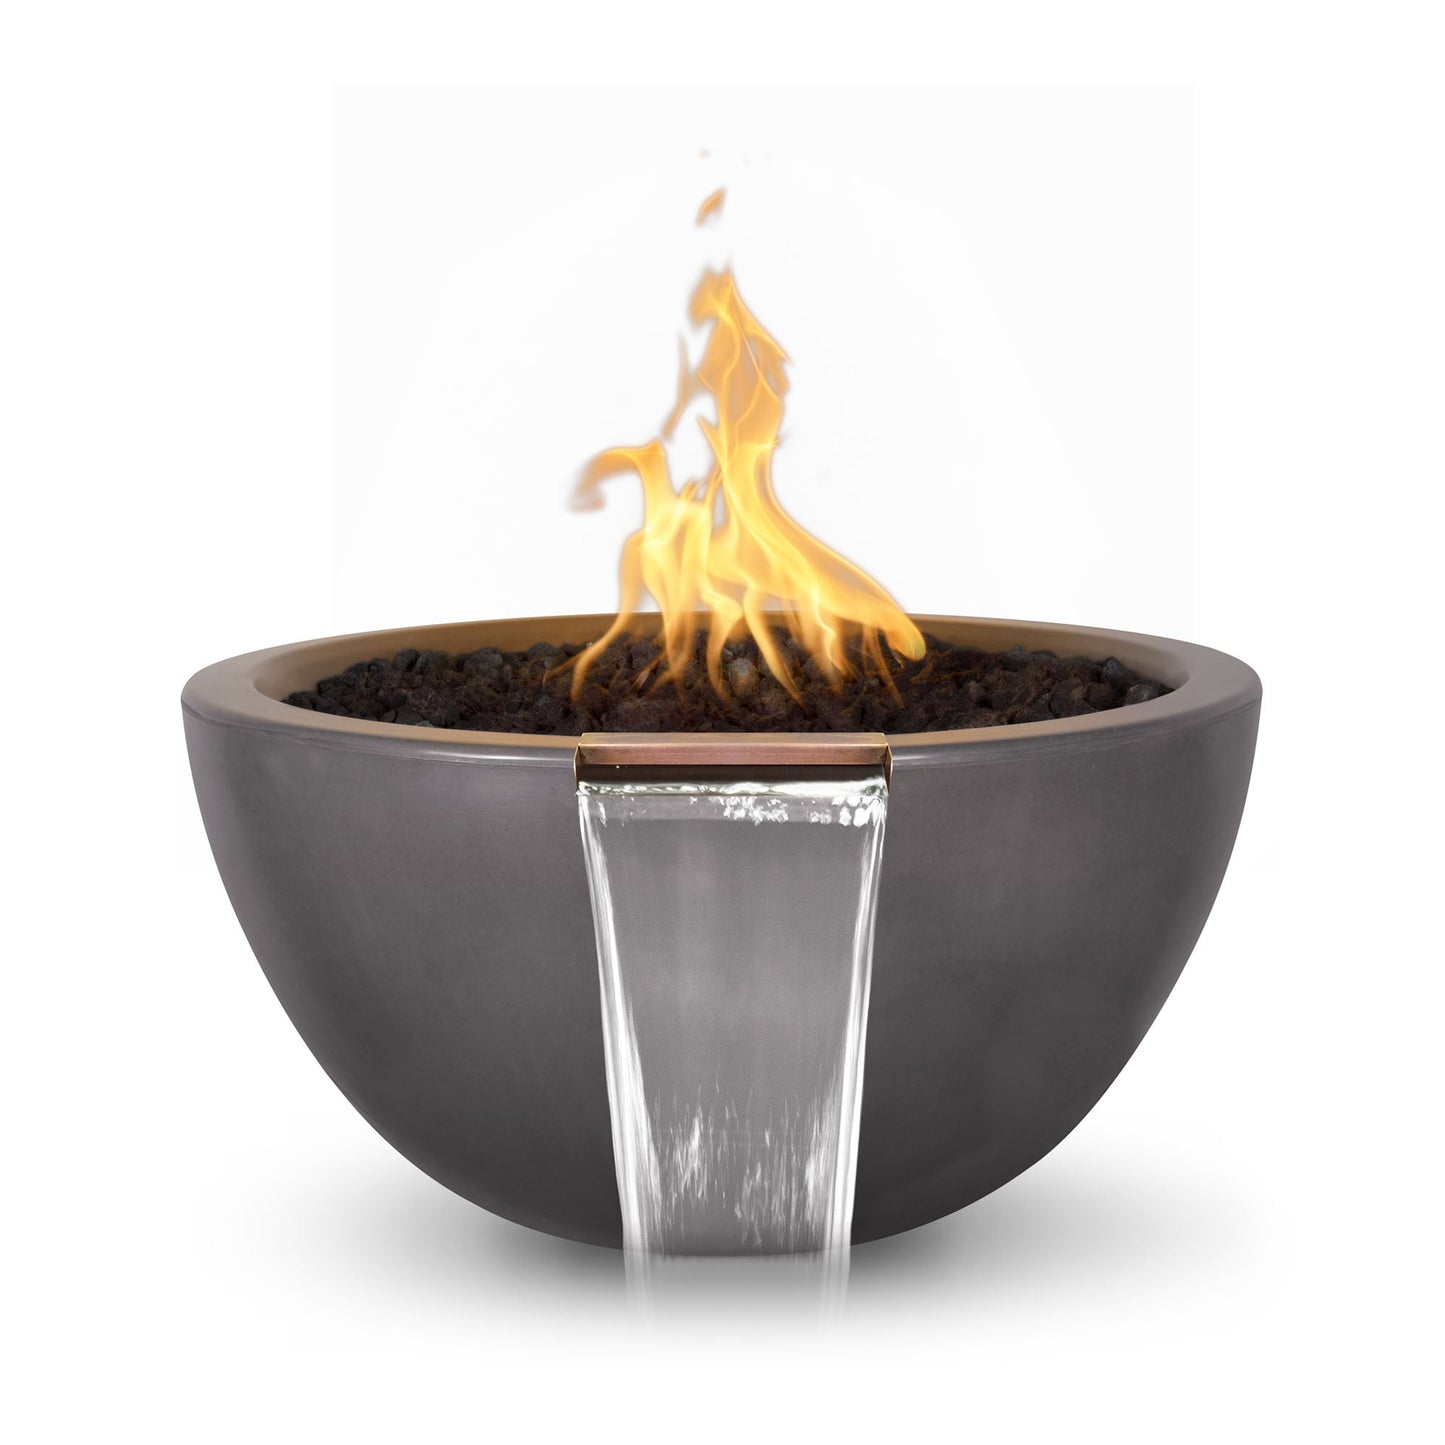 The Outdoor Plus Round Luna 30" Rustic Gray GFRC Concrete Liquid Propane Fire & Water Bowl with Match Lit with Flame Sense Ignition